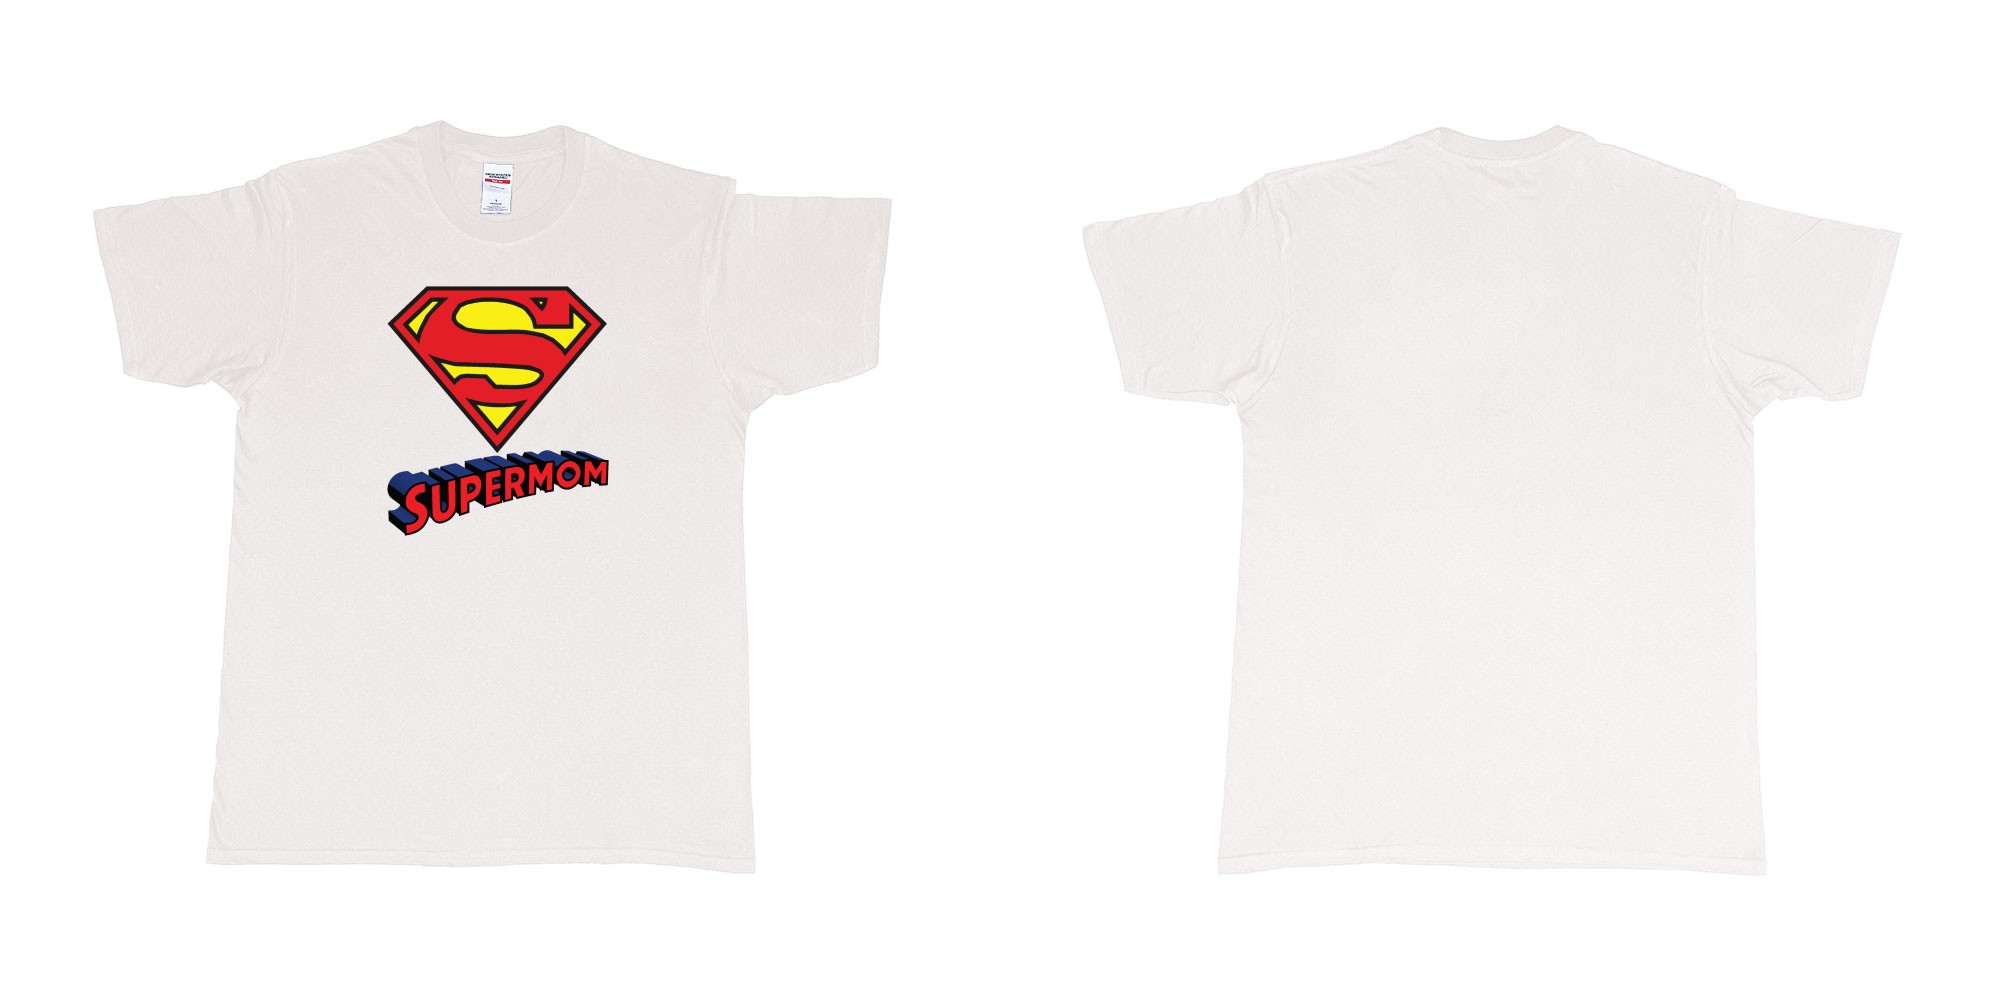 Custom tshirt design superman logo with own custom text print bali in fabric color white choice your own text made in Bali by The Pirate Way